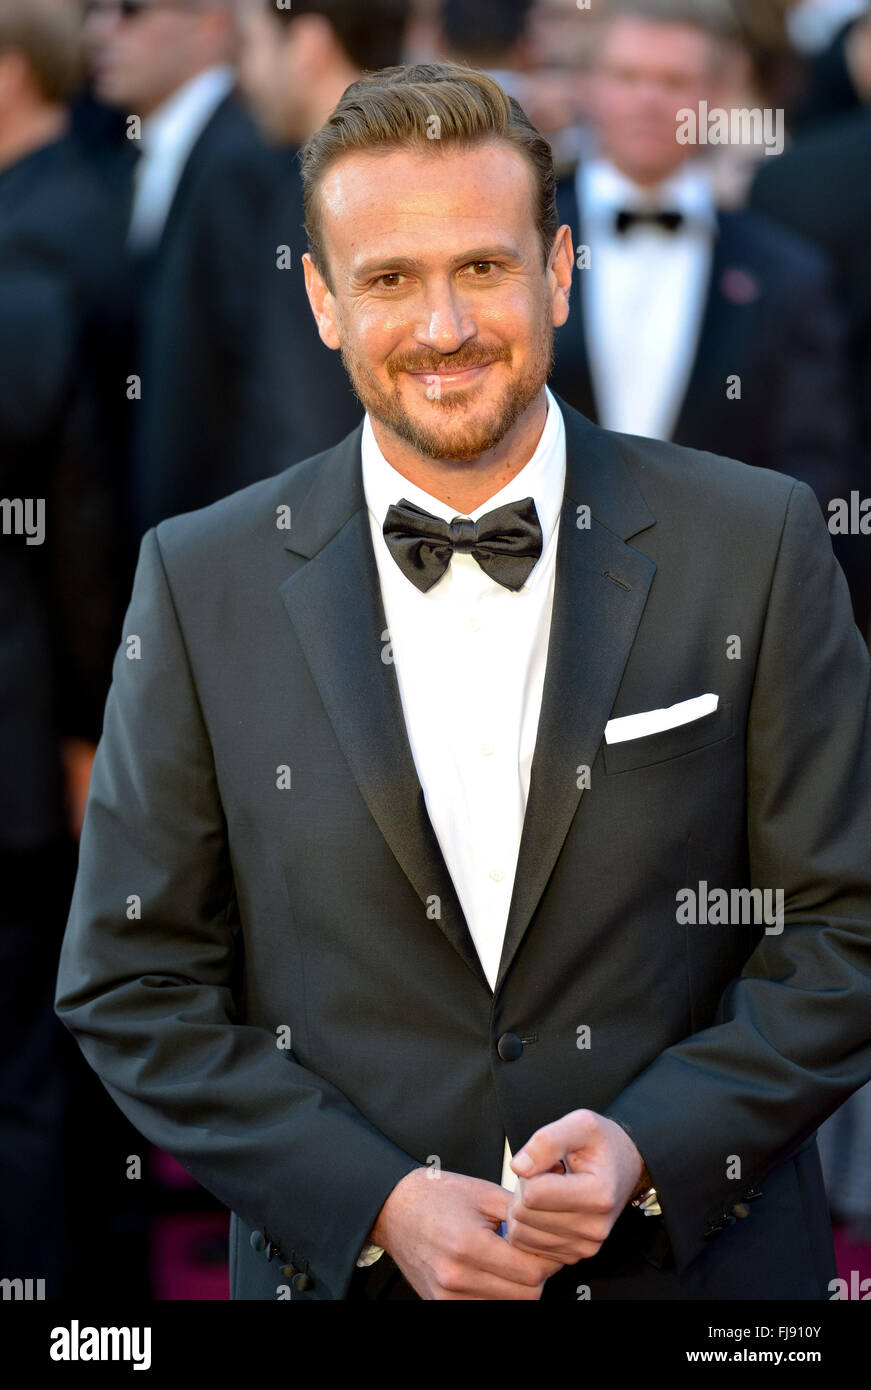 Actor Jason Segel arrives for the 88th annual Academy Awards ceremony at the Dolby Theatre in Hollywood, California, USA, 28 February 2016. The Oscars are presented for outstanding individual or collective efforts in 24 categories in filmmaking.  Photo: Hubert Boesl/dpa - NO WIRE SERVICE - Stock Photo